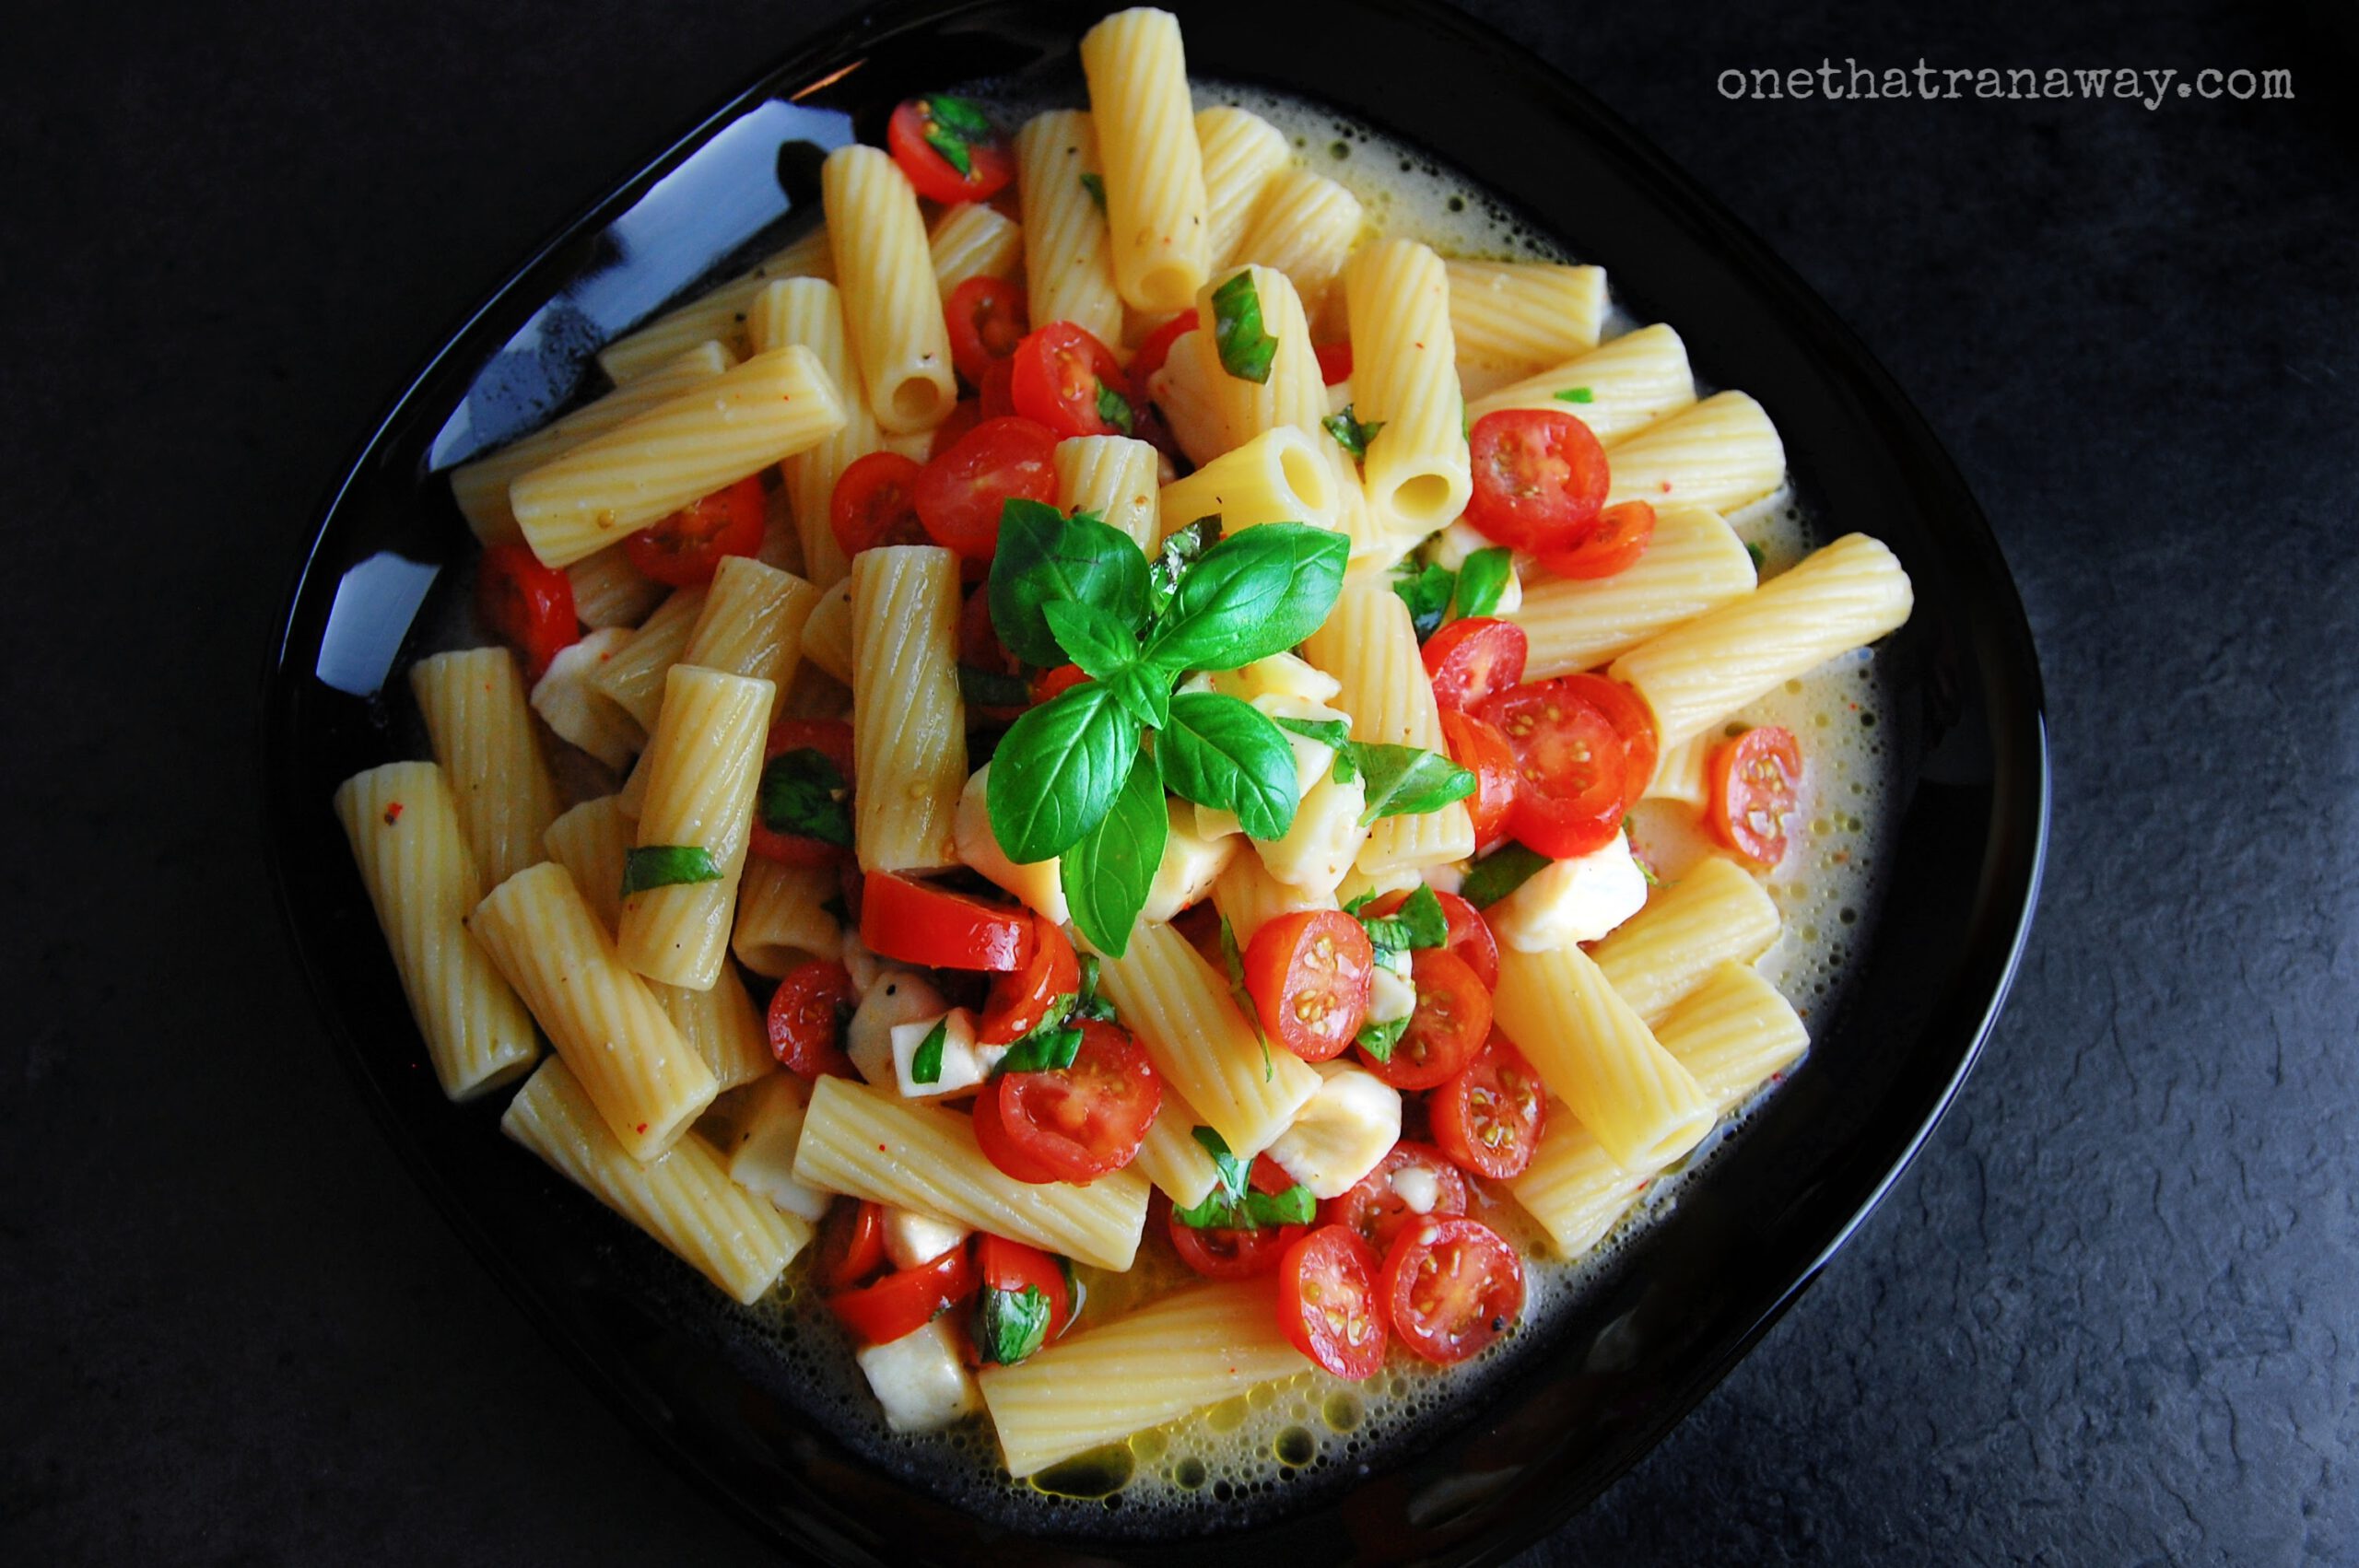 plate of pasta with cherry tomatoes and mozzarella